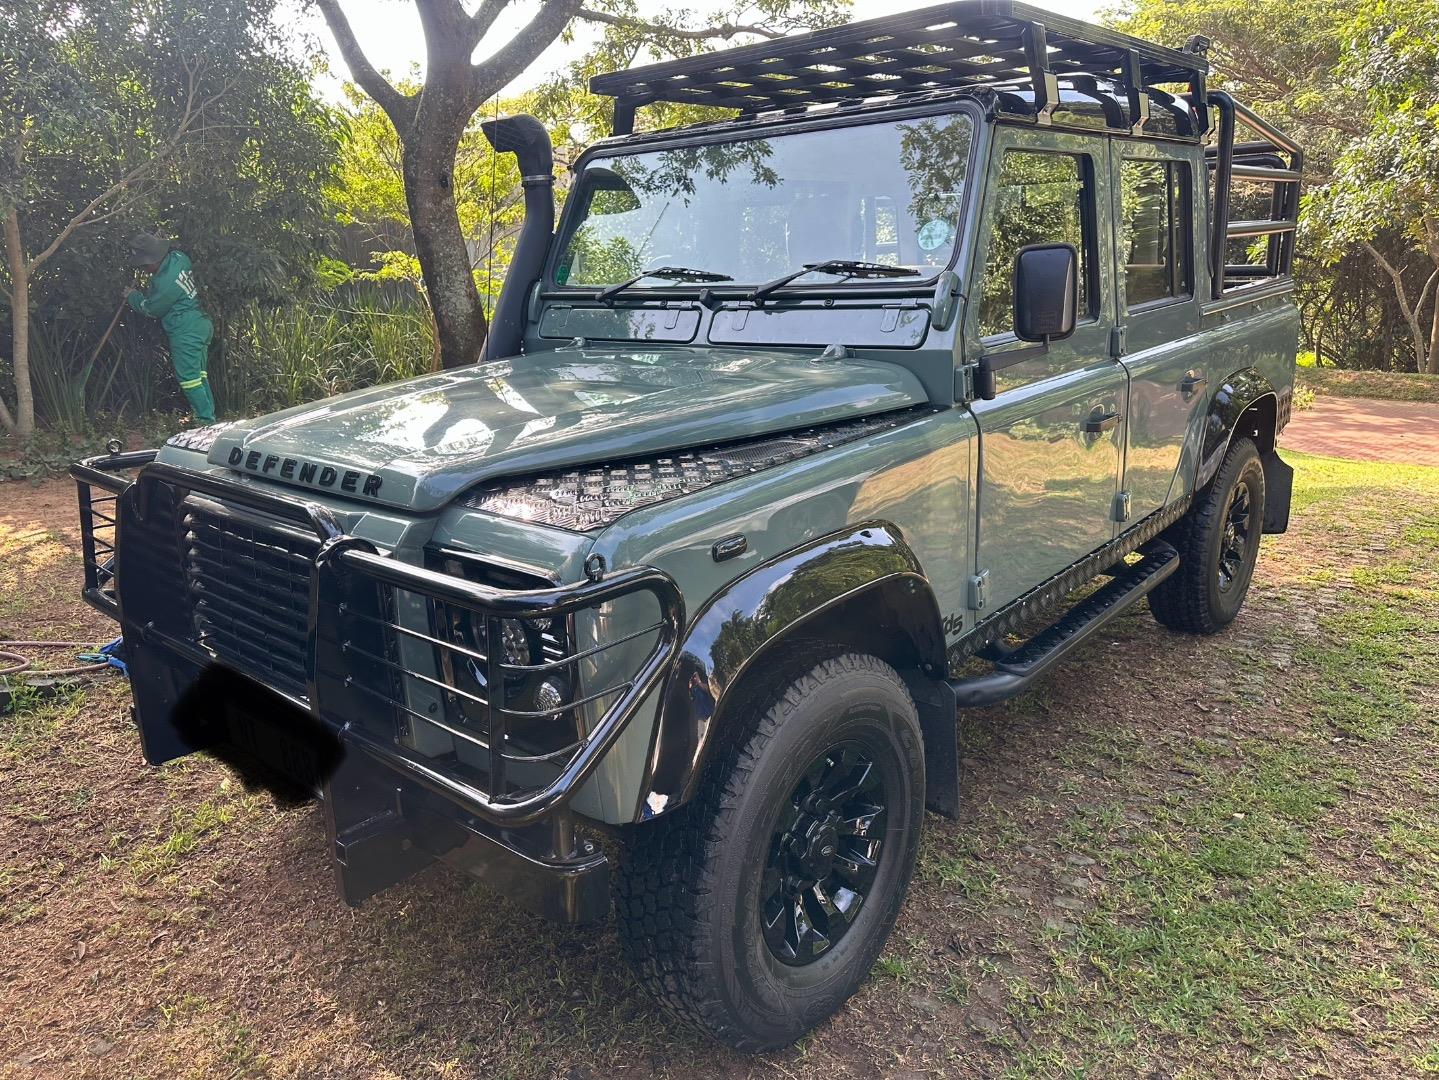 2004 Land Rover Defender 110 2.5 Td5 Double Cab For Sale